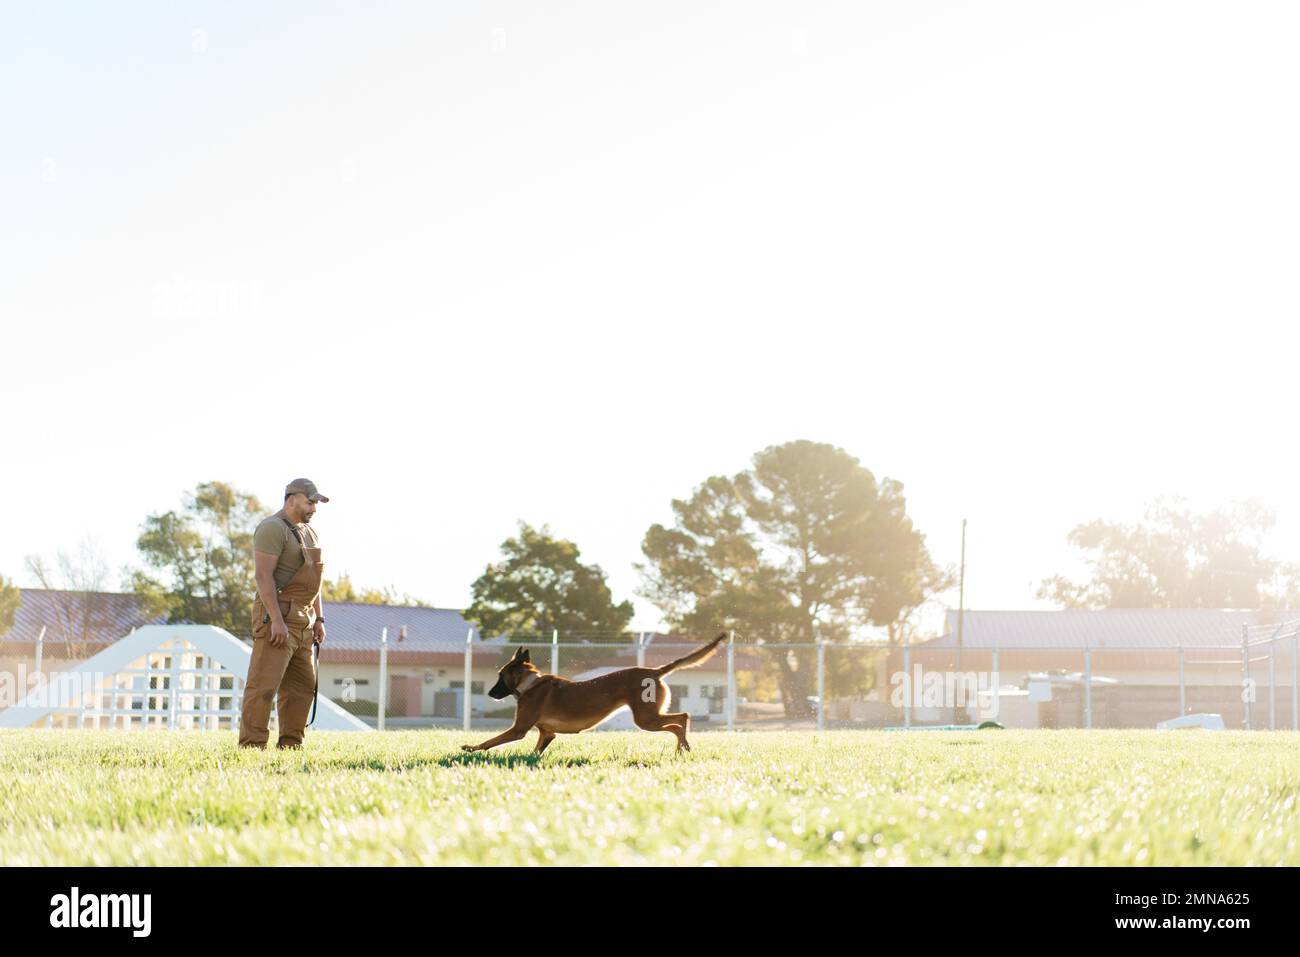 U.S. Air Force Senior Airman Andrew Melis, 60th Security Forces Squadron  military dog handler, poses for a photo with Aarapahoe, a military working  dog, at Travis Air Force Base, California, Sept. 30